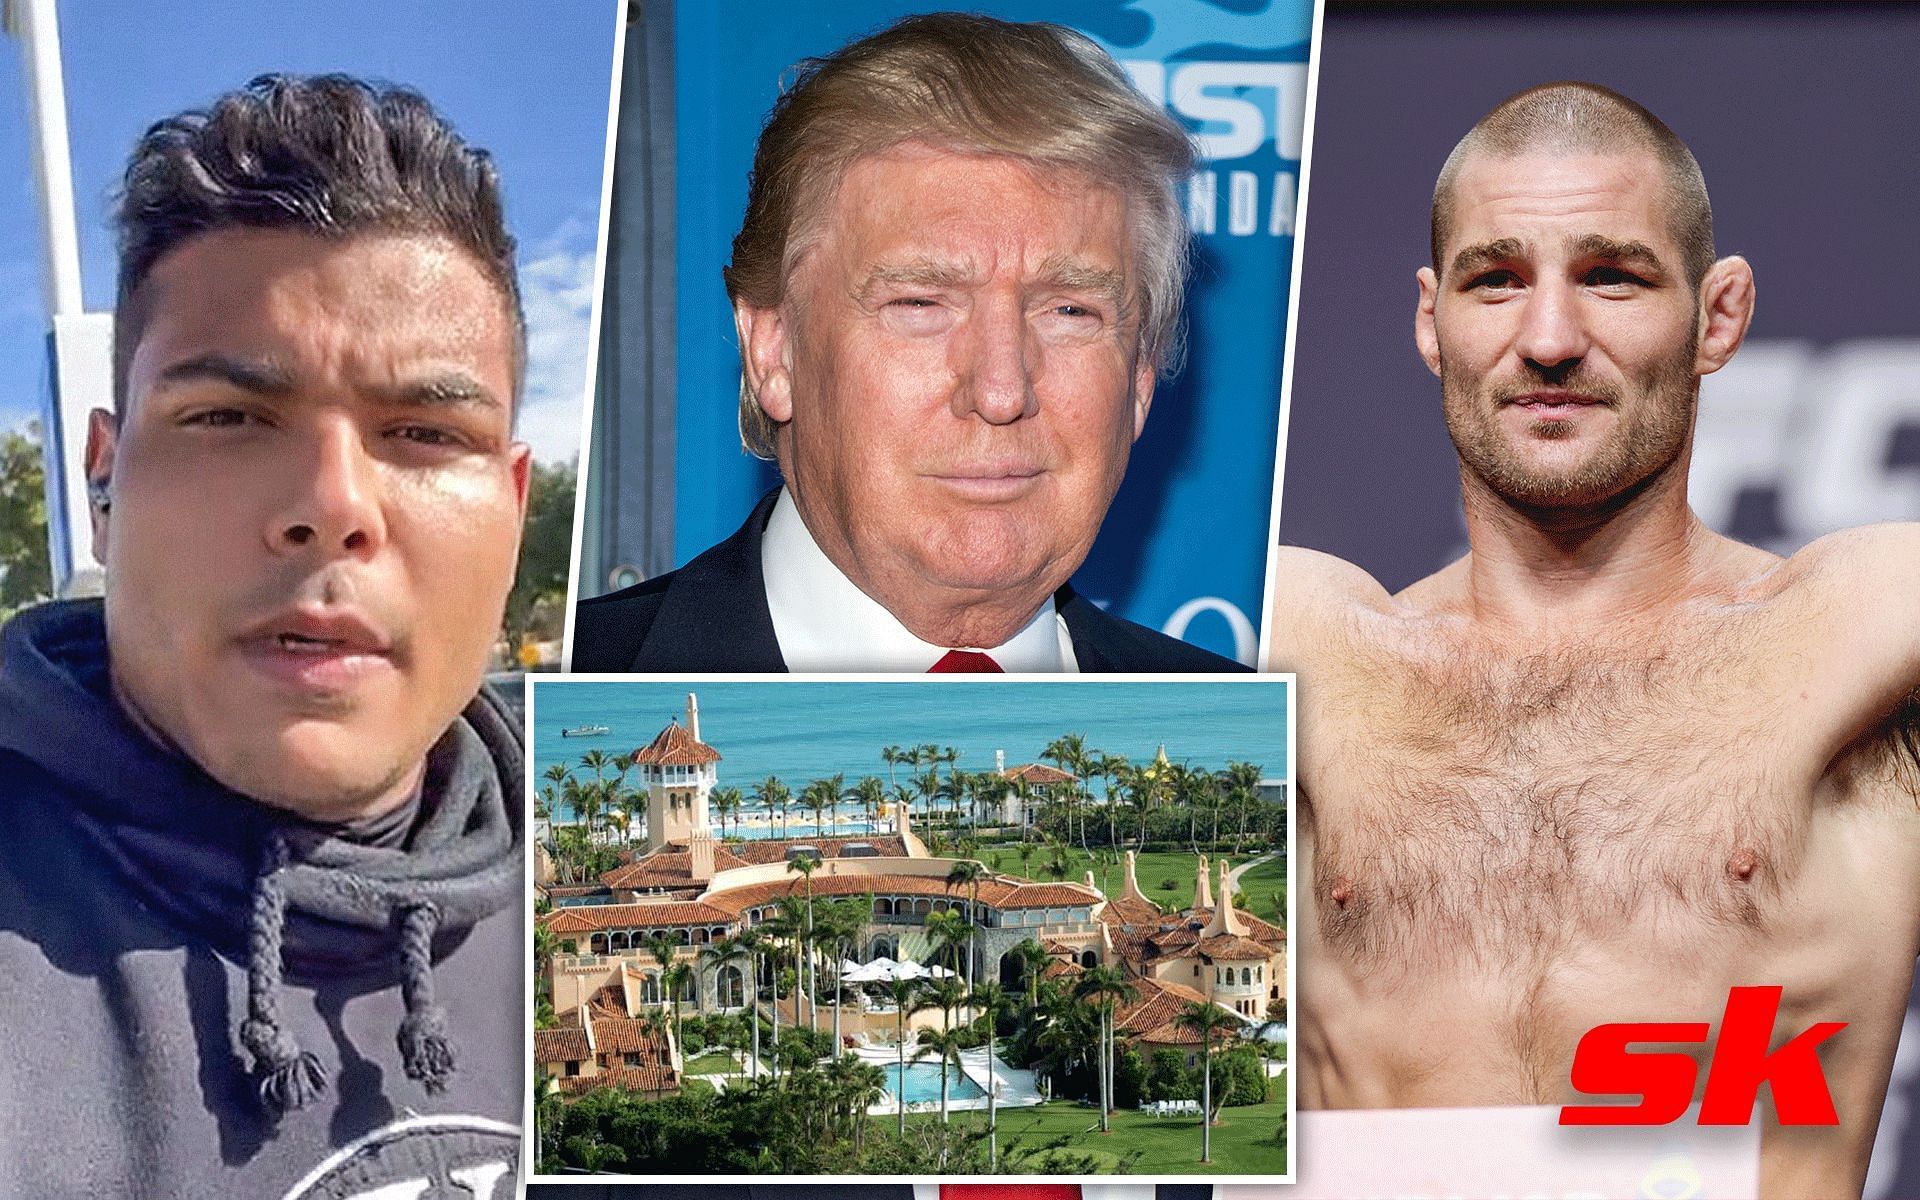 Paulo Costa (left), Donald Trump (top centre), Mar-a-Lago (bottom centre), and Sean Strickland (right). [Images courtesy: left image from Instagram @borrachinhamma, bottom centre image from Twitter @ramsey_lewis007, and rest from Getty Images]